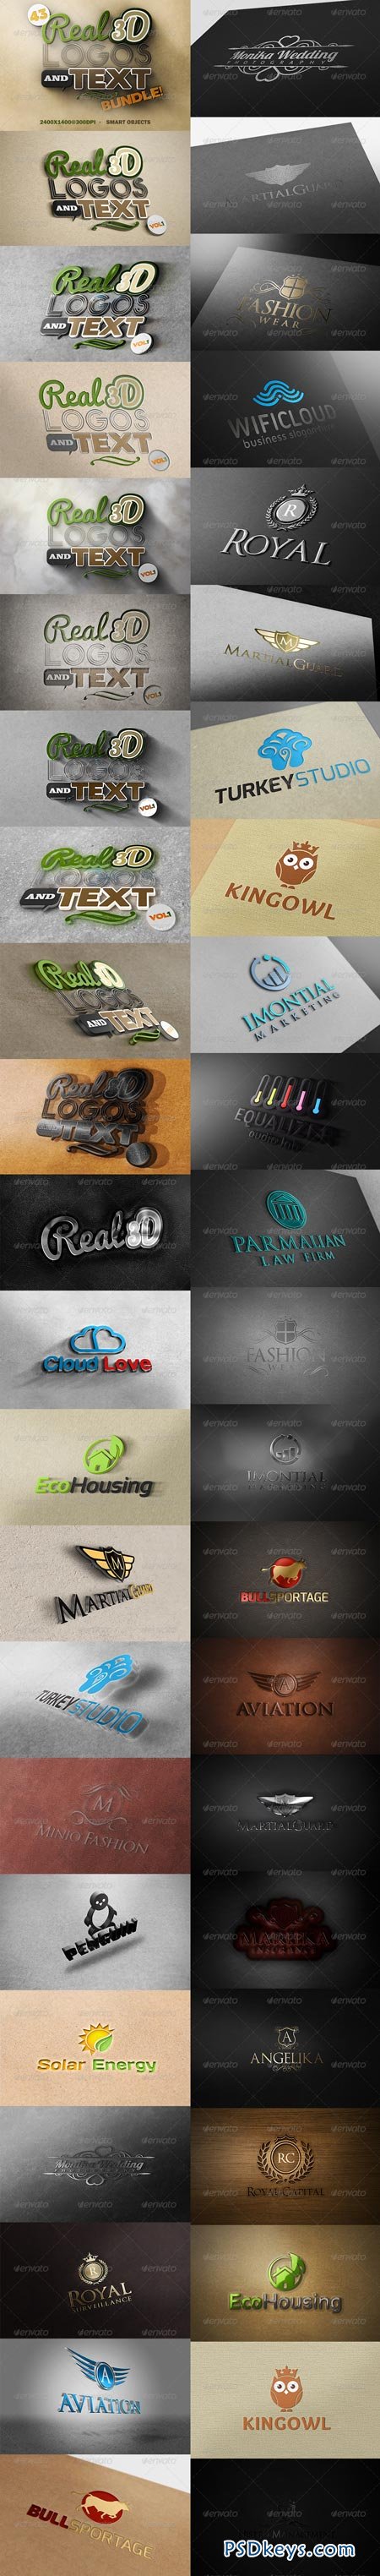 free videohive after effects projects set 43 [link] 2016 - torrent